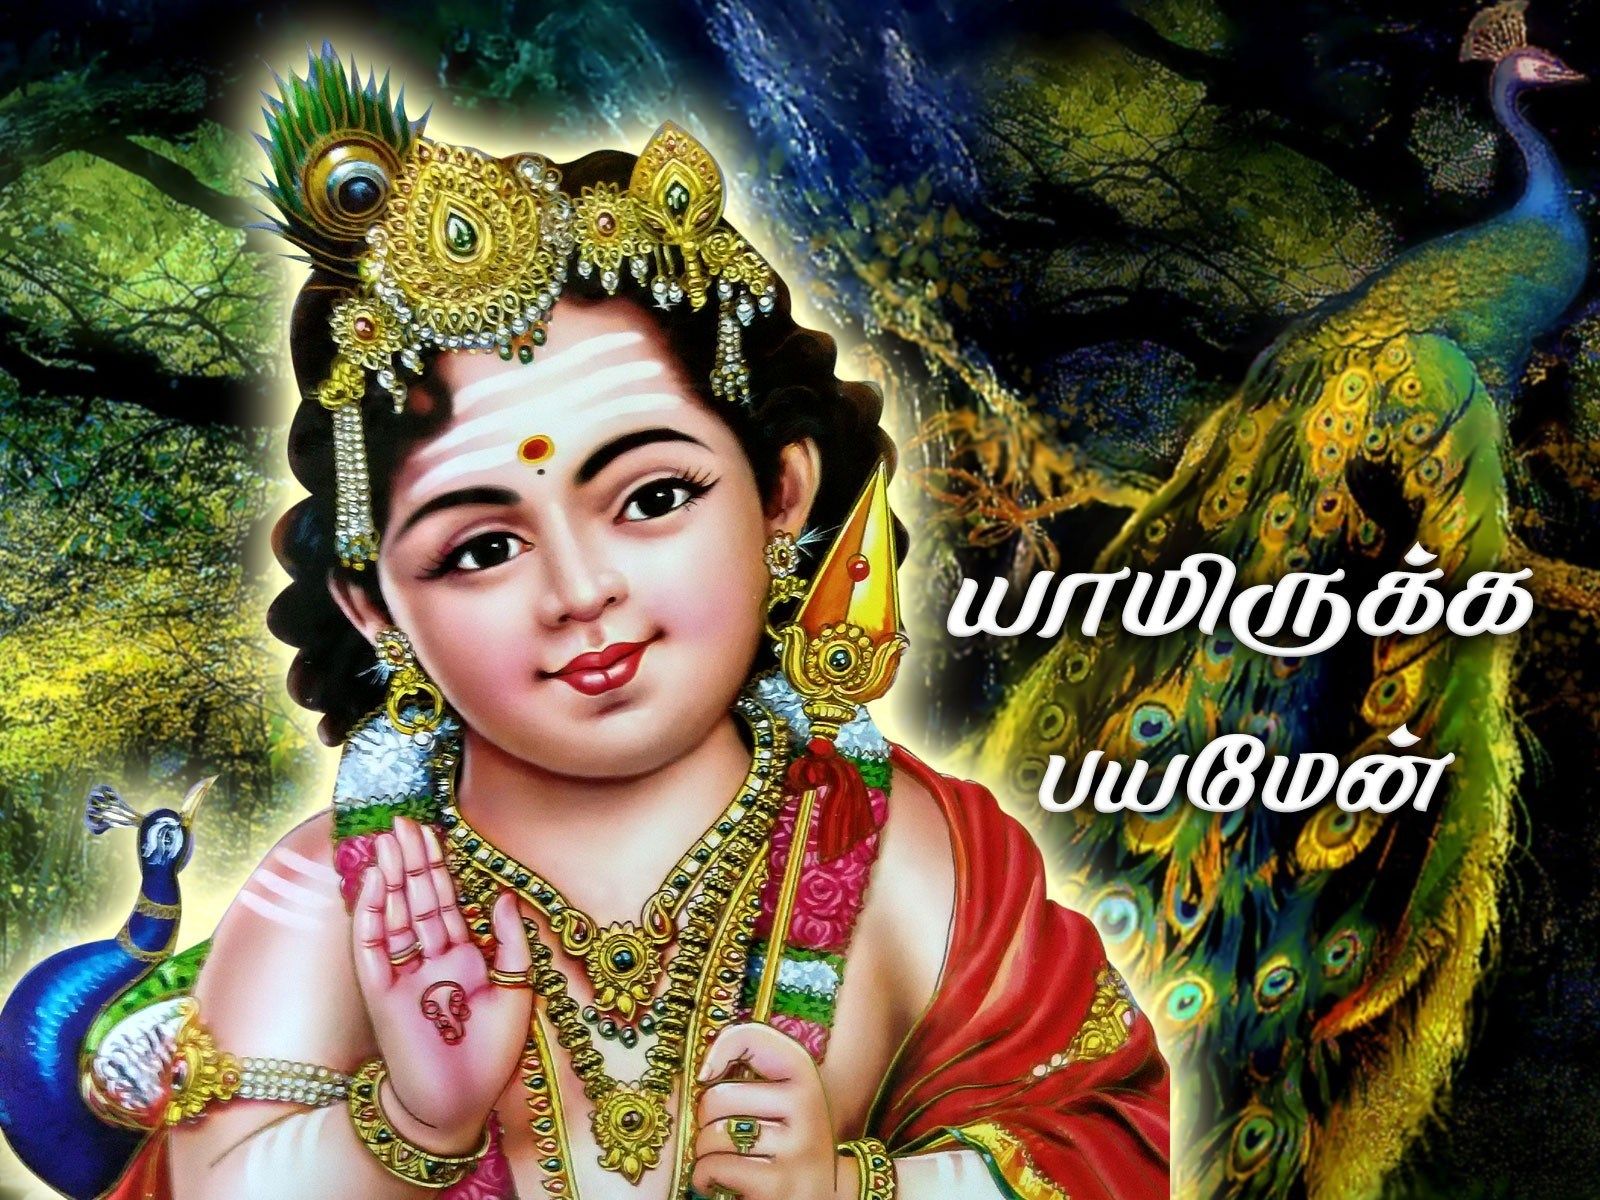 Wallpaper Cave 1080P Ultra Hd Murugan Hd Images / Cave with body of